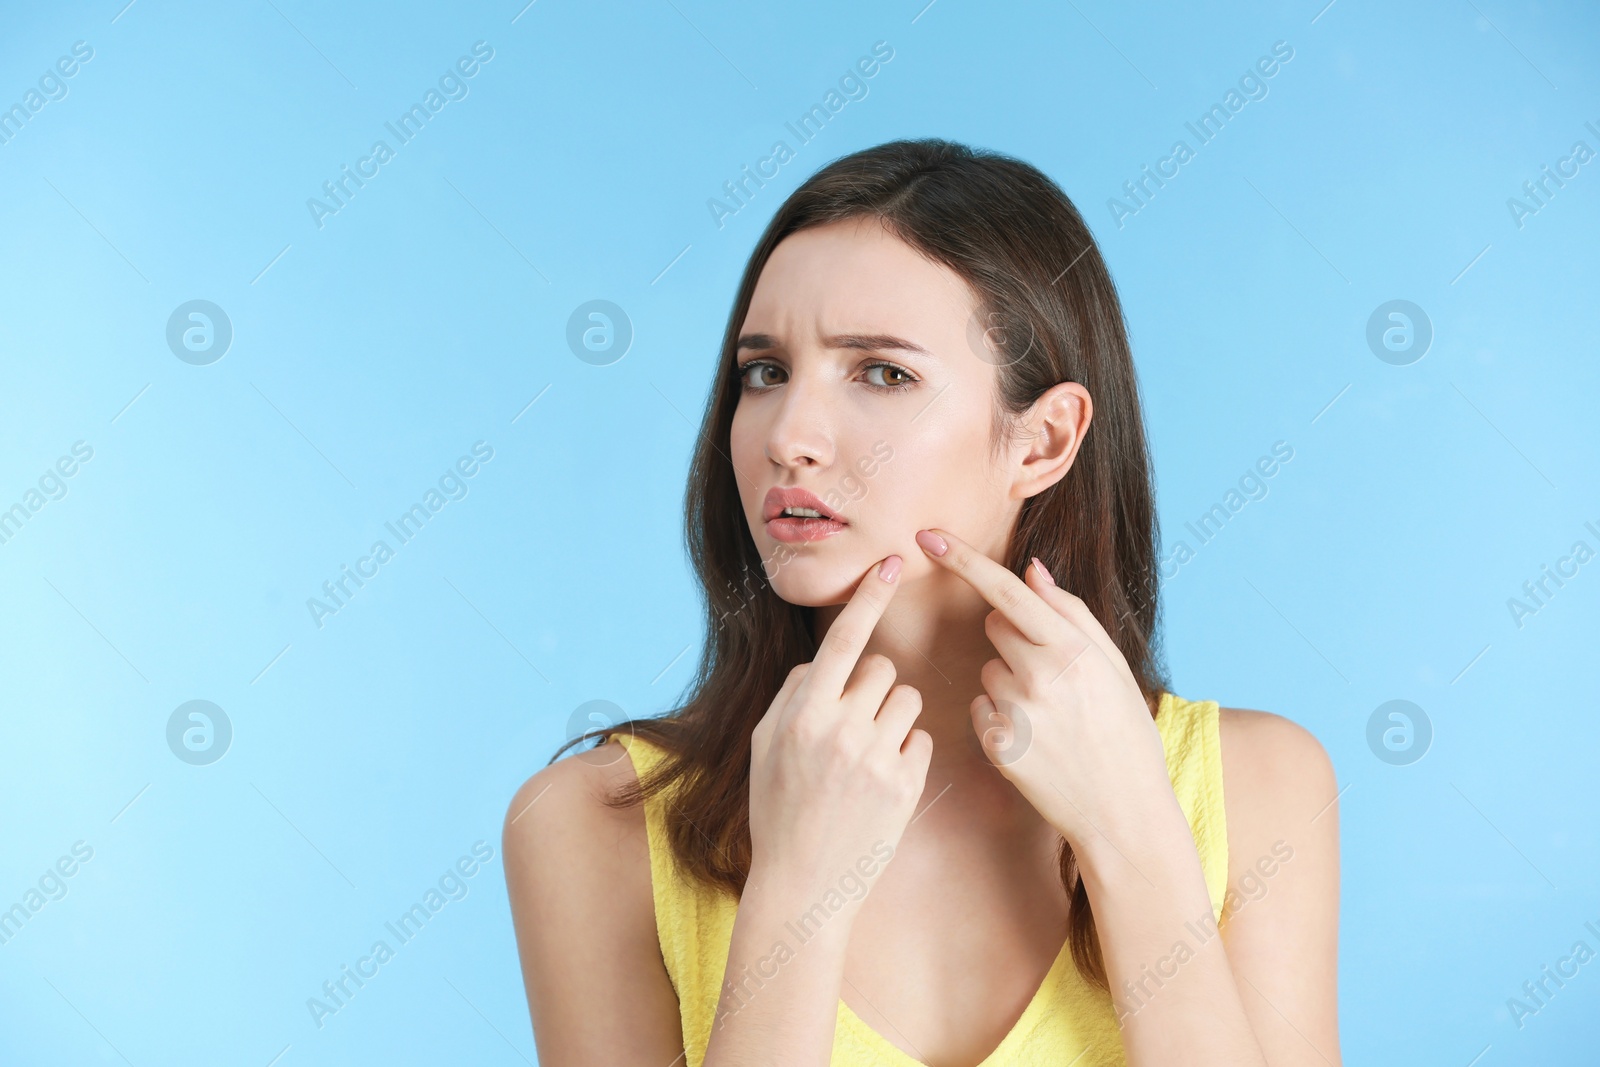 Photo of Teenage girl with acne problem against color background